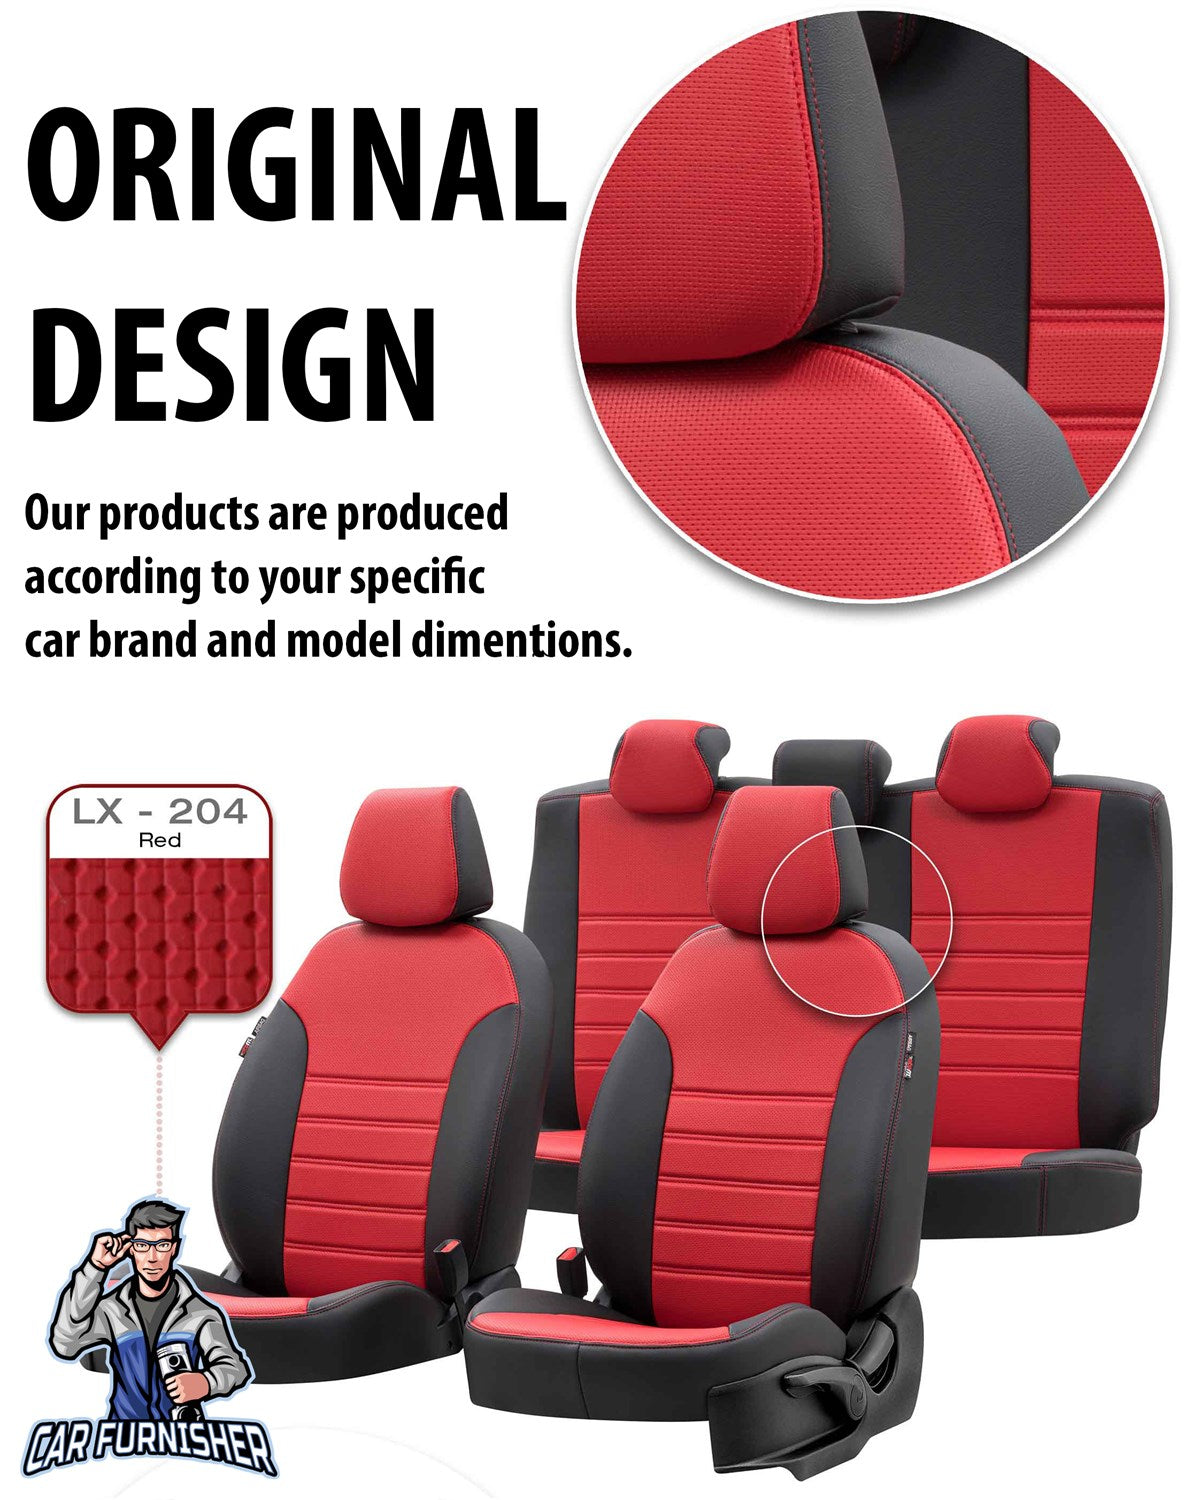 Chevrolet Cruze Car Seat Covers 2009-2016 New York Design Smoked Full Set (5 Seats + Handrest) Leather & Fabric